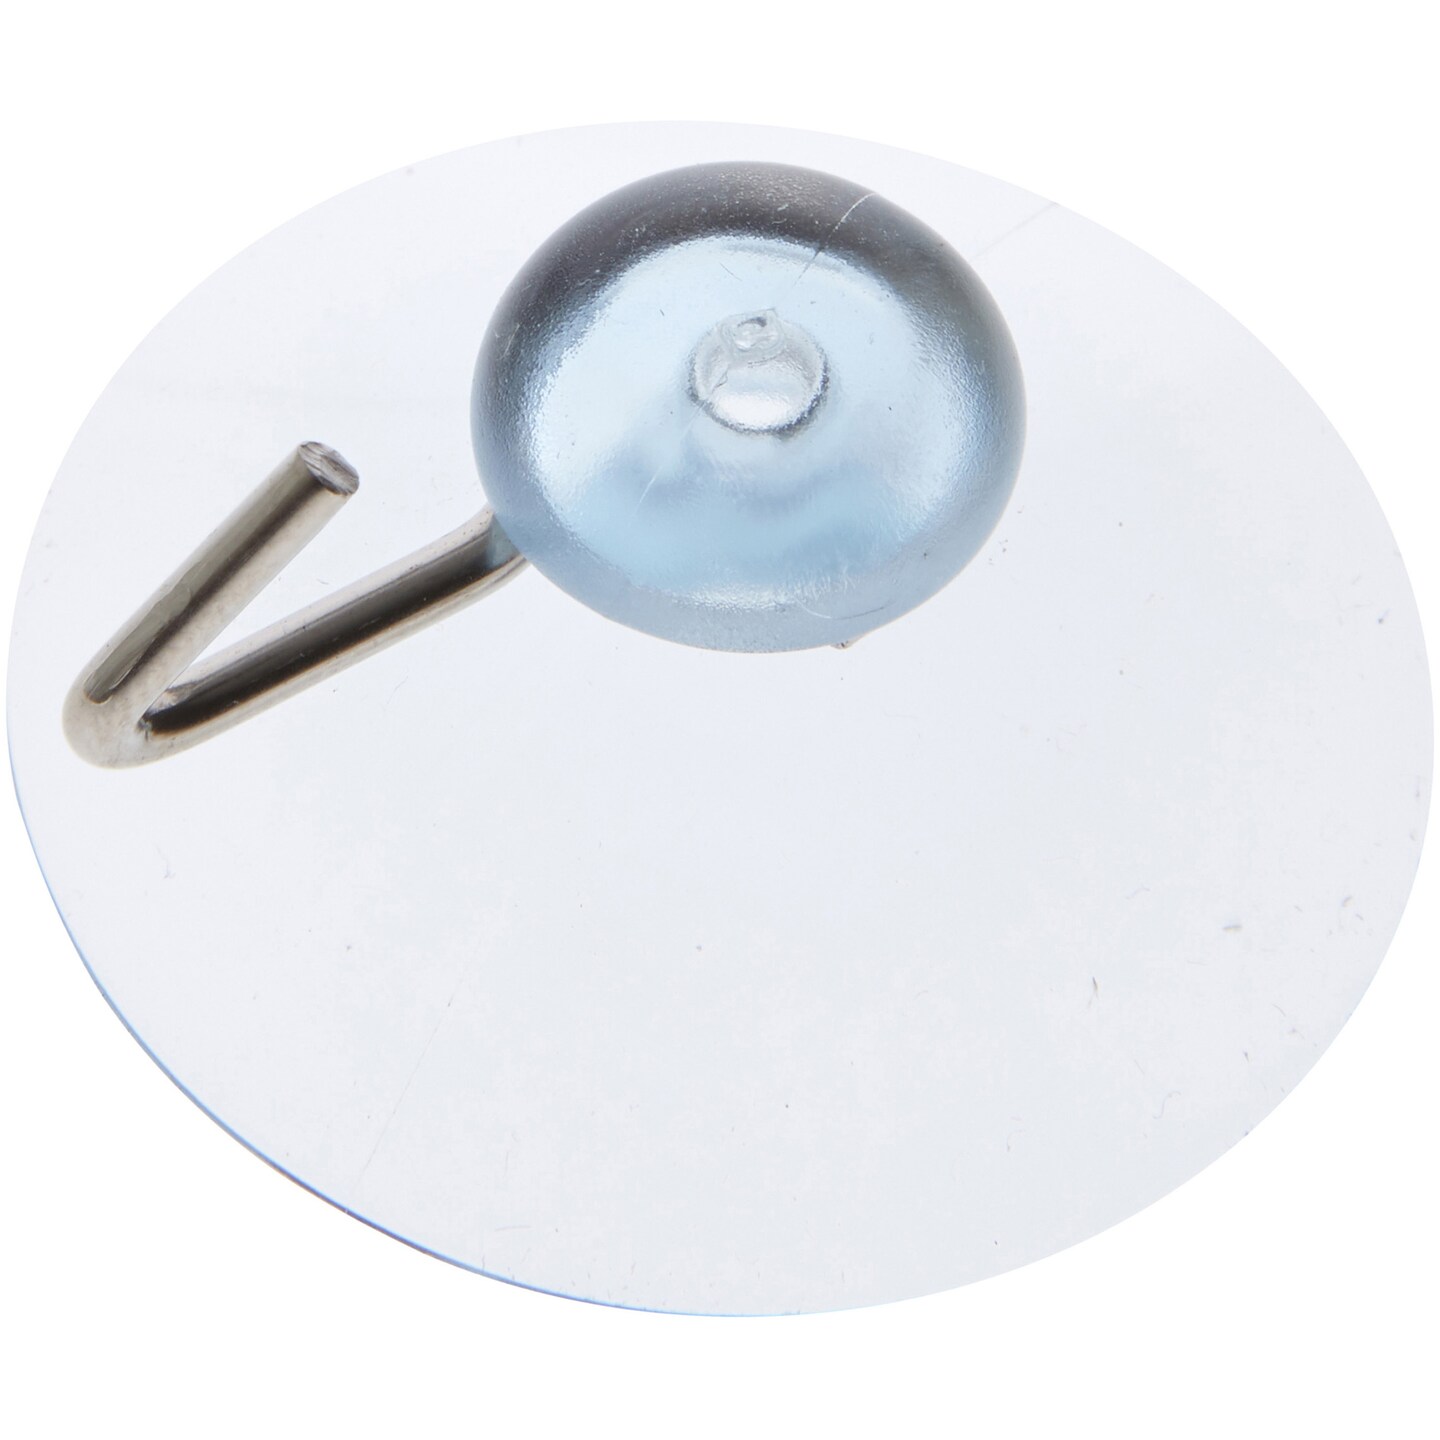 Bard&#x27;s Clear Plastic Suction Cup with Hook, 1.5&#x22; Diameter